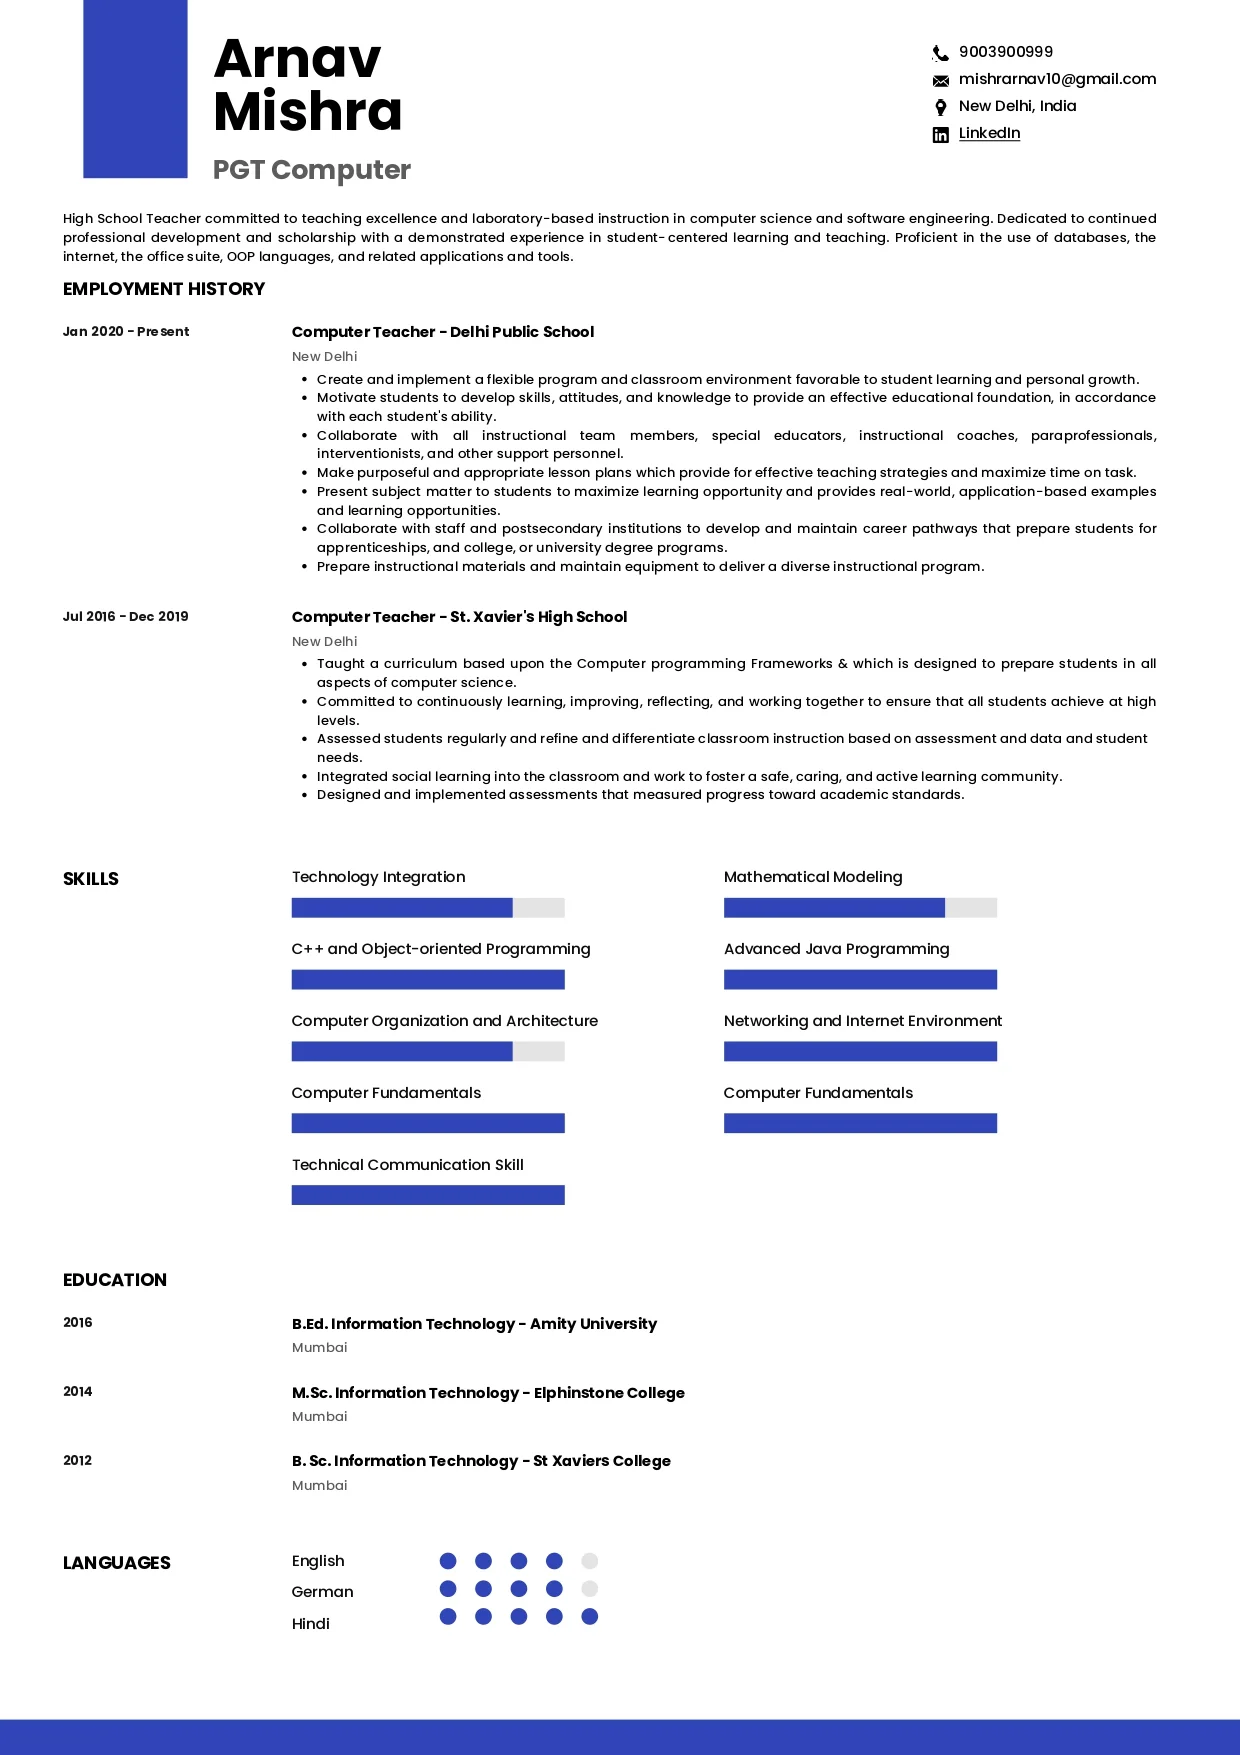 Sample PGT Computer | Free Resume Templates & Samples on Resumod.co